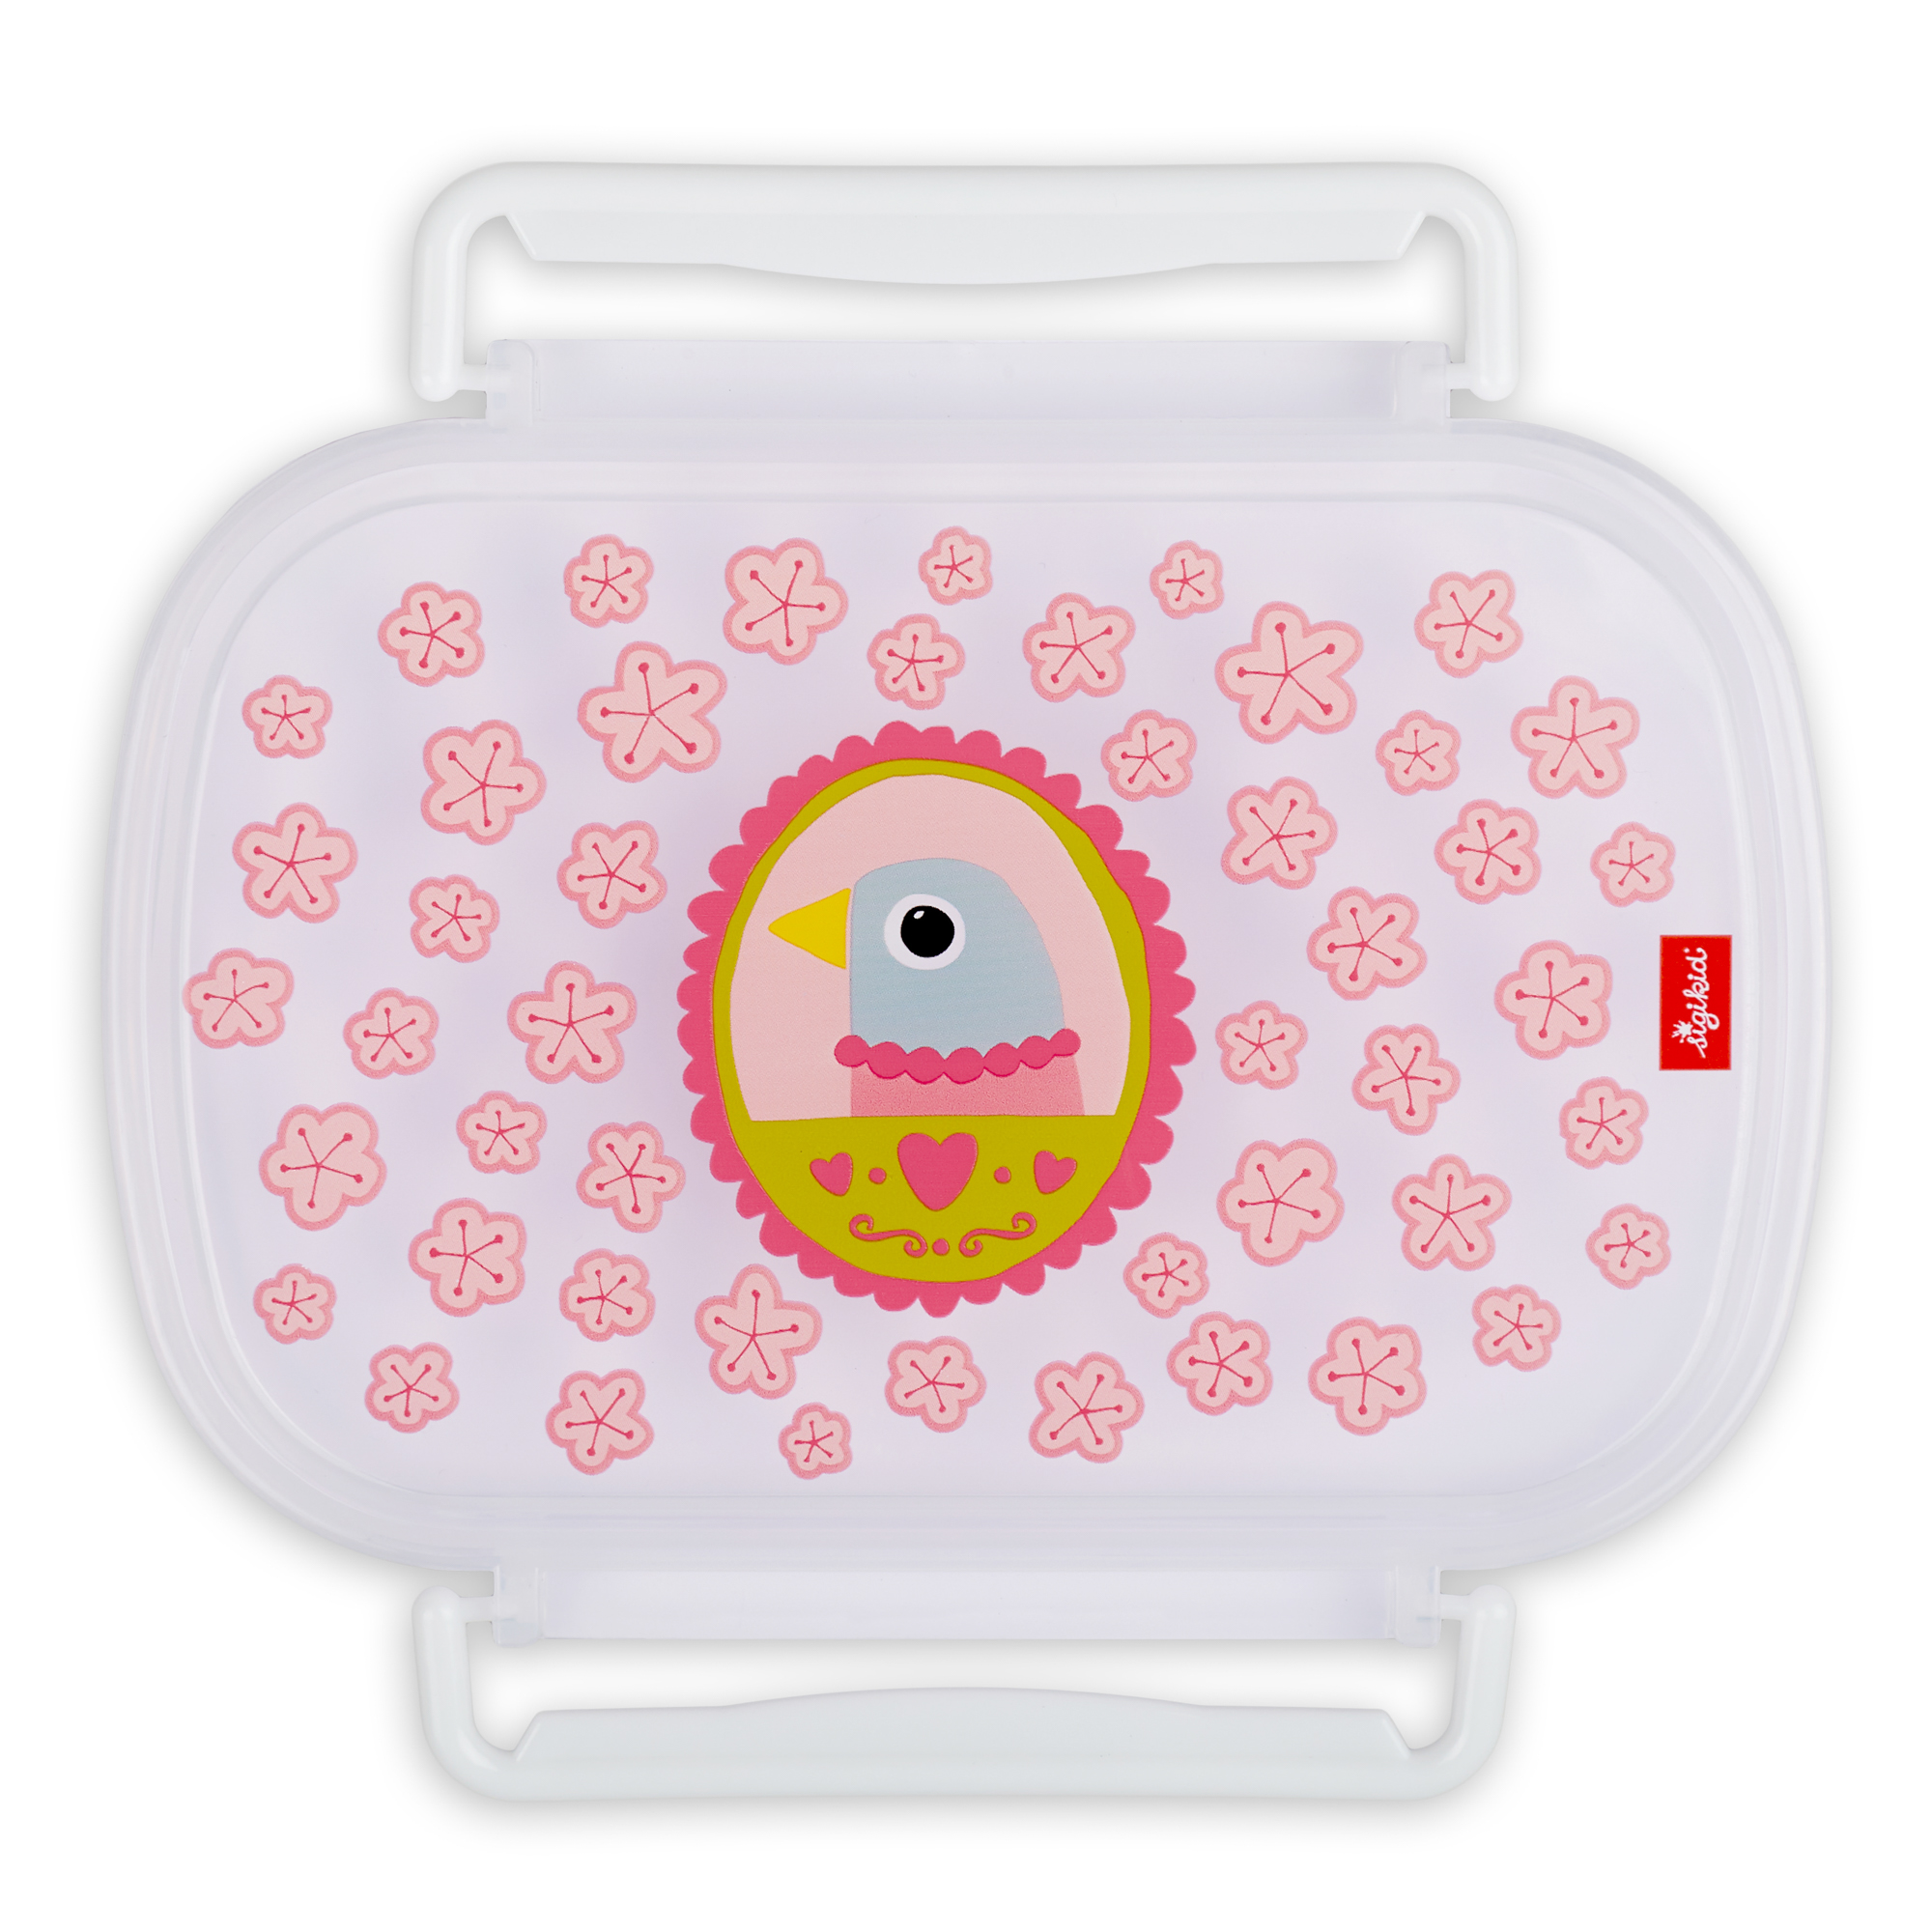 Lunch box lid replacement, bird Finky Pinky